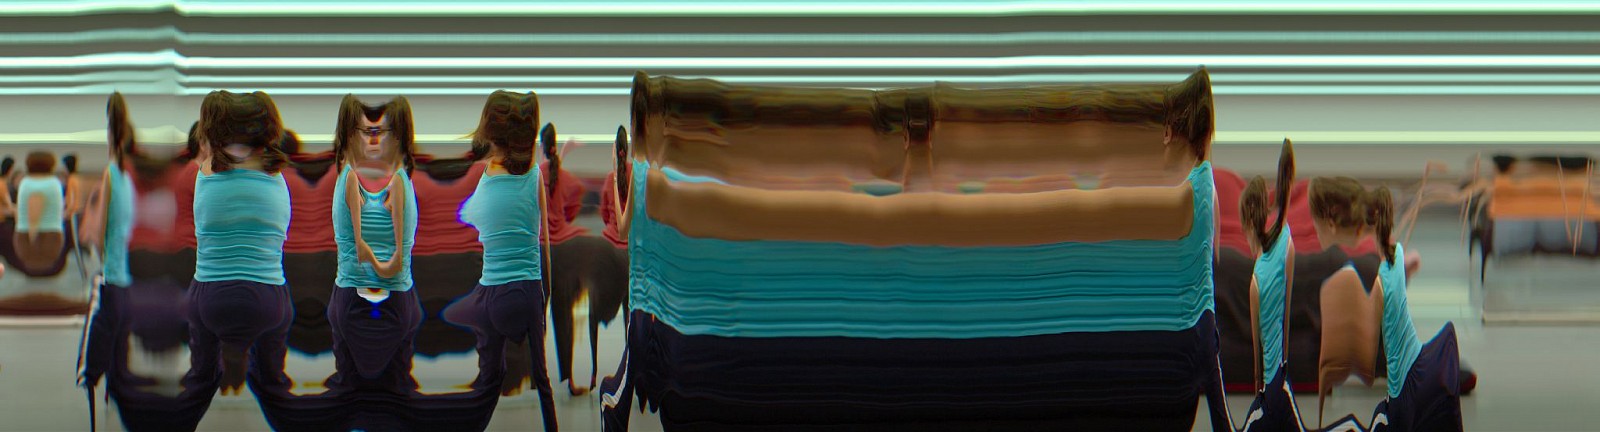 Jay Mark Johnson, TAICHI MOTION STUDY 31, 2005 Los Angeles CA
archival pigment on paper, mounted on aluminum, 40 x 148 in. (101.6 x 375.9 cm)